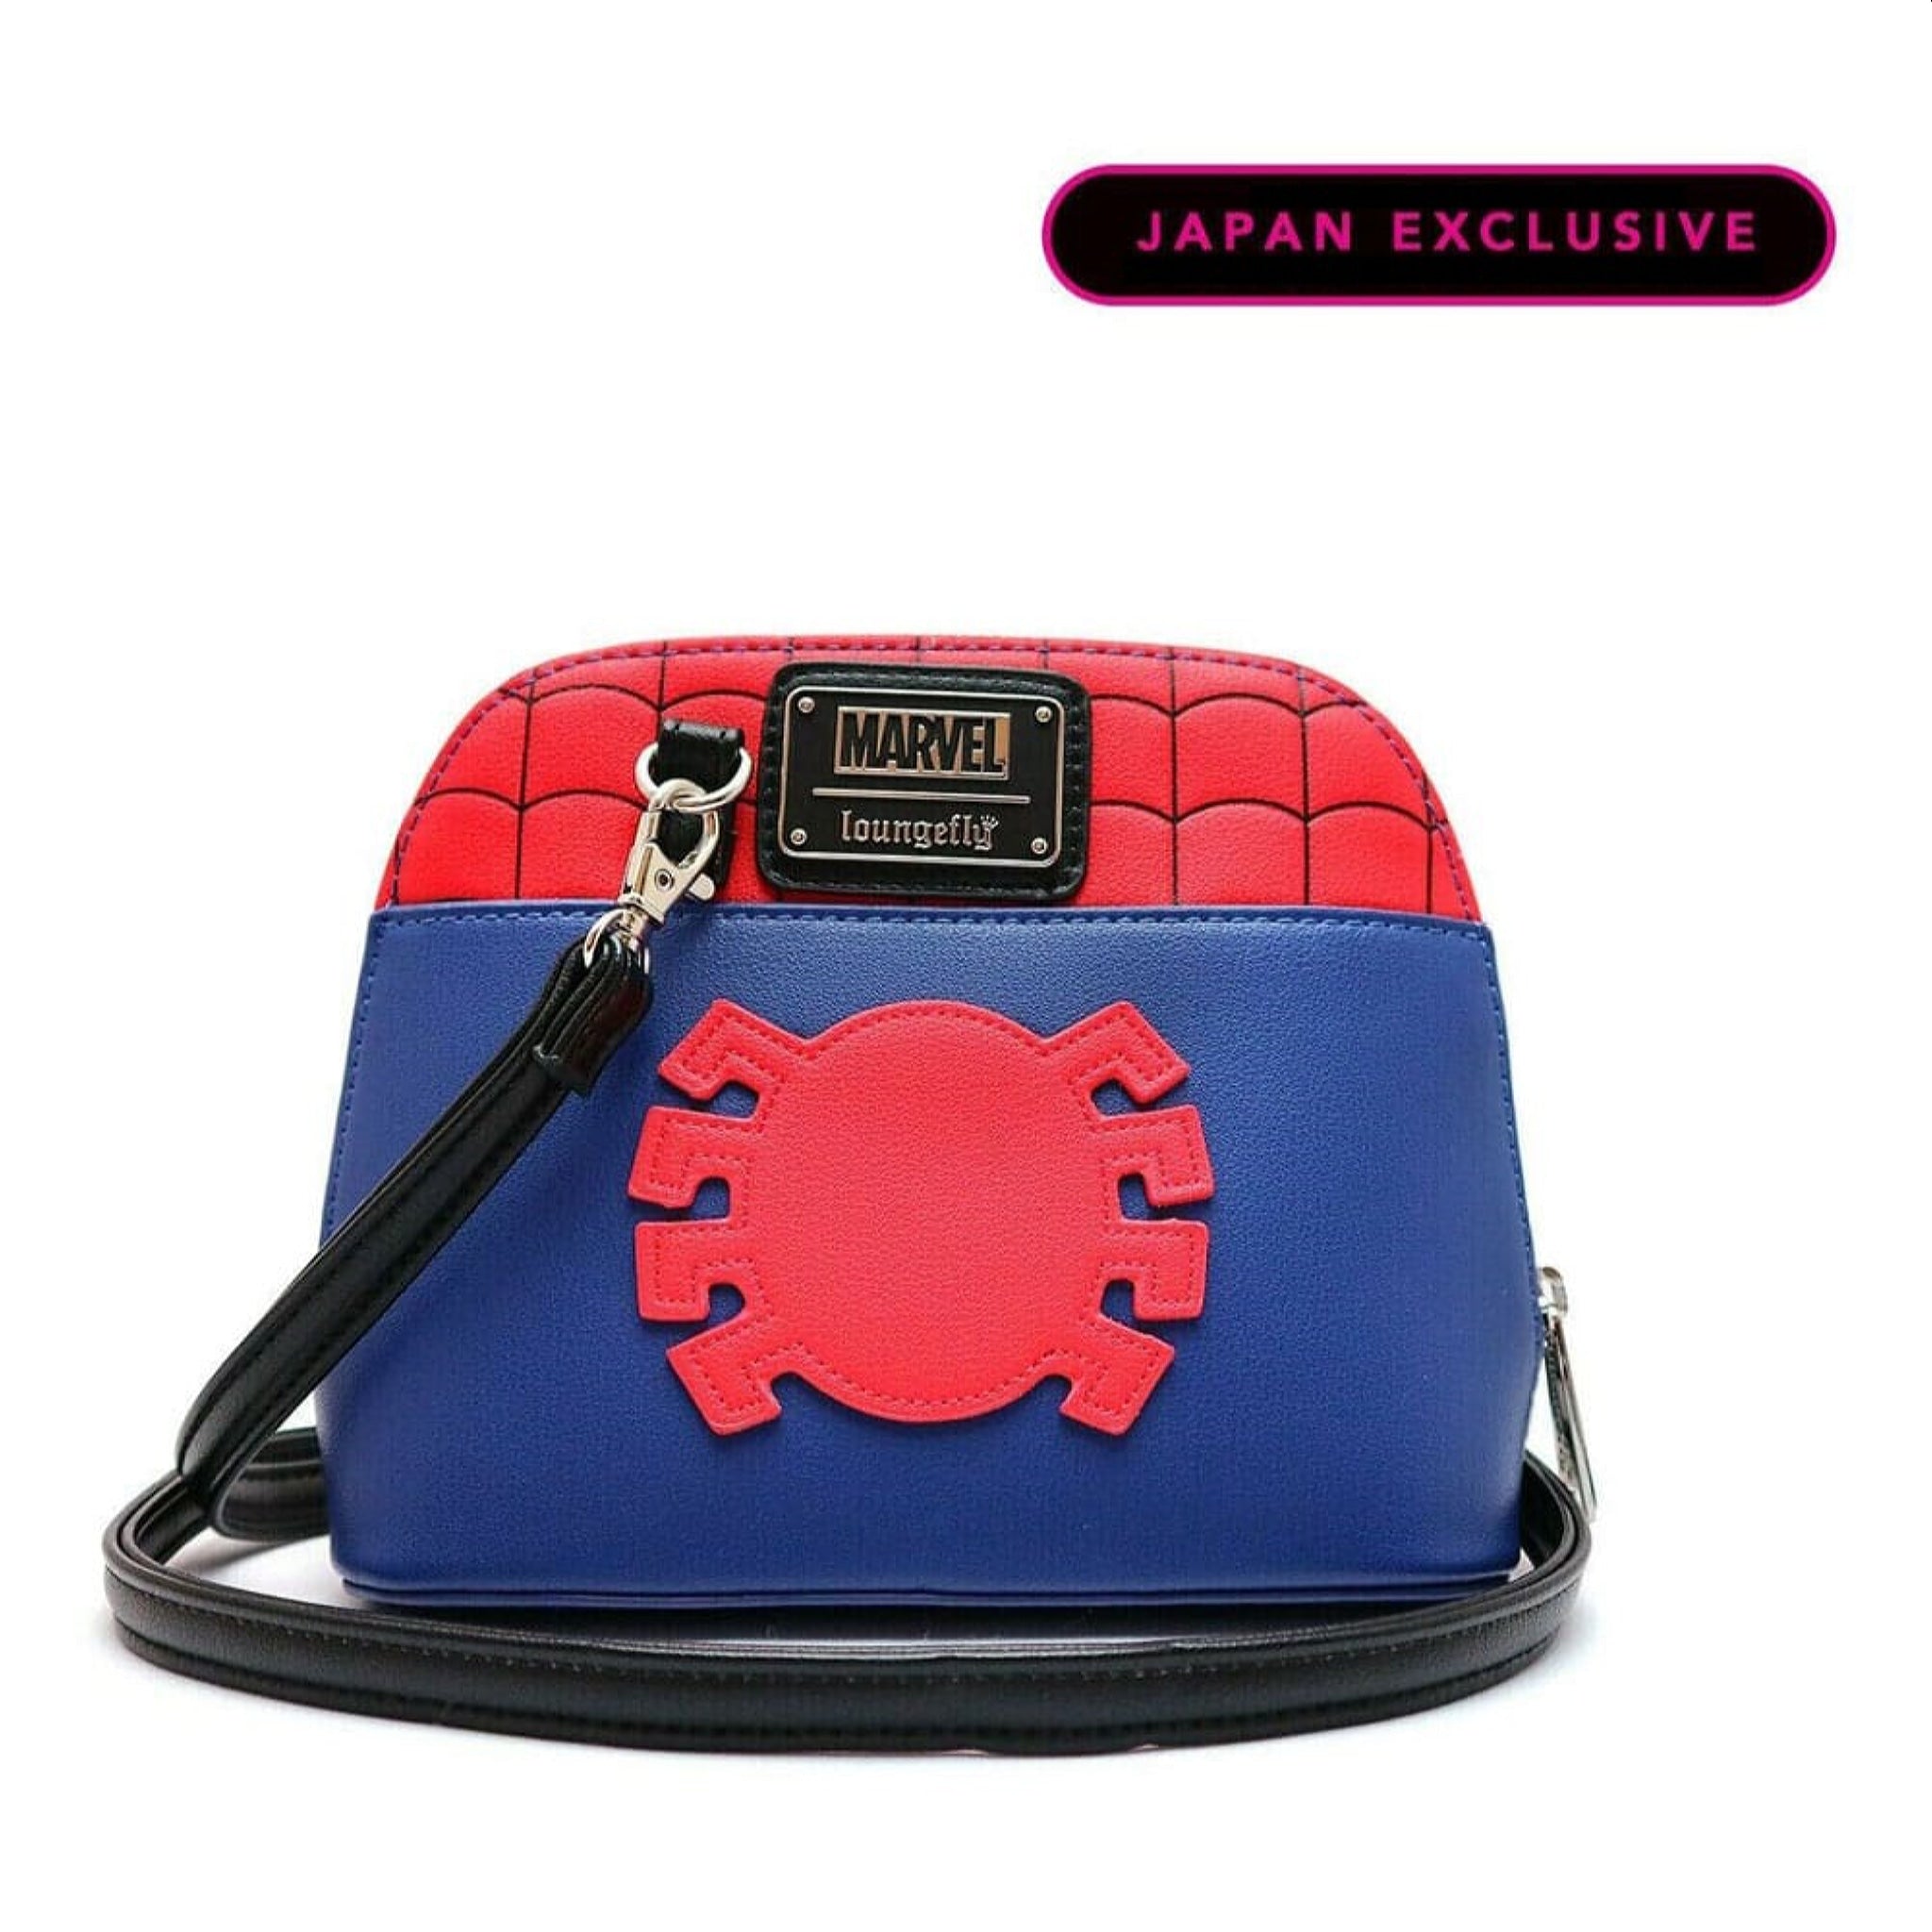 Loungefly Marvel Spider-Man Japan Exclusive Crossbody Bag